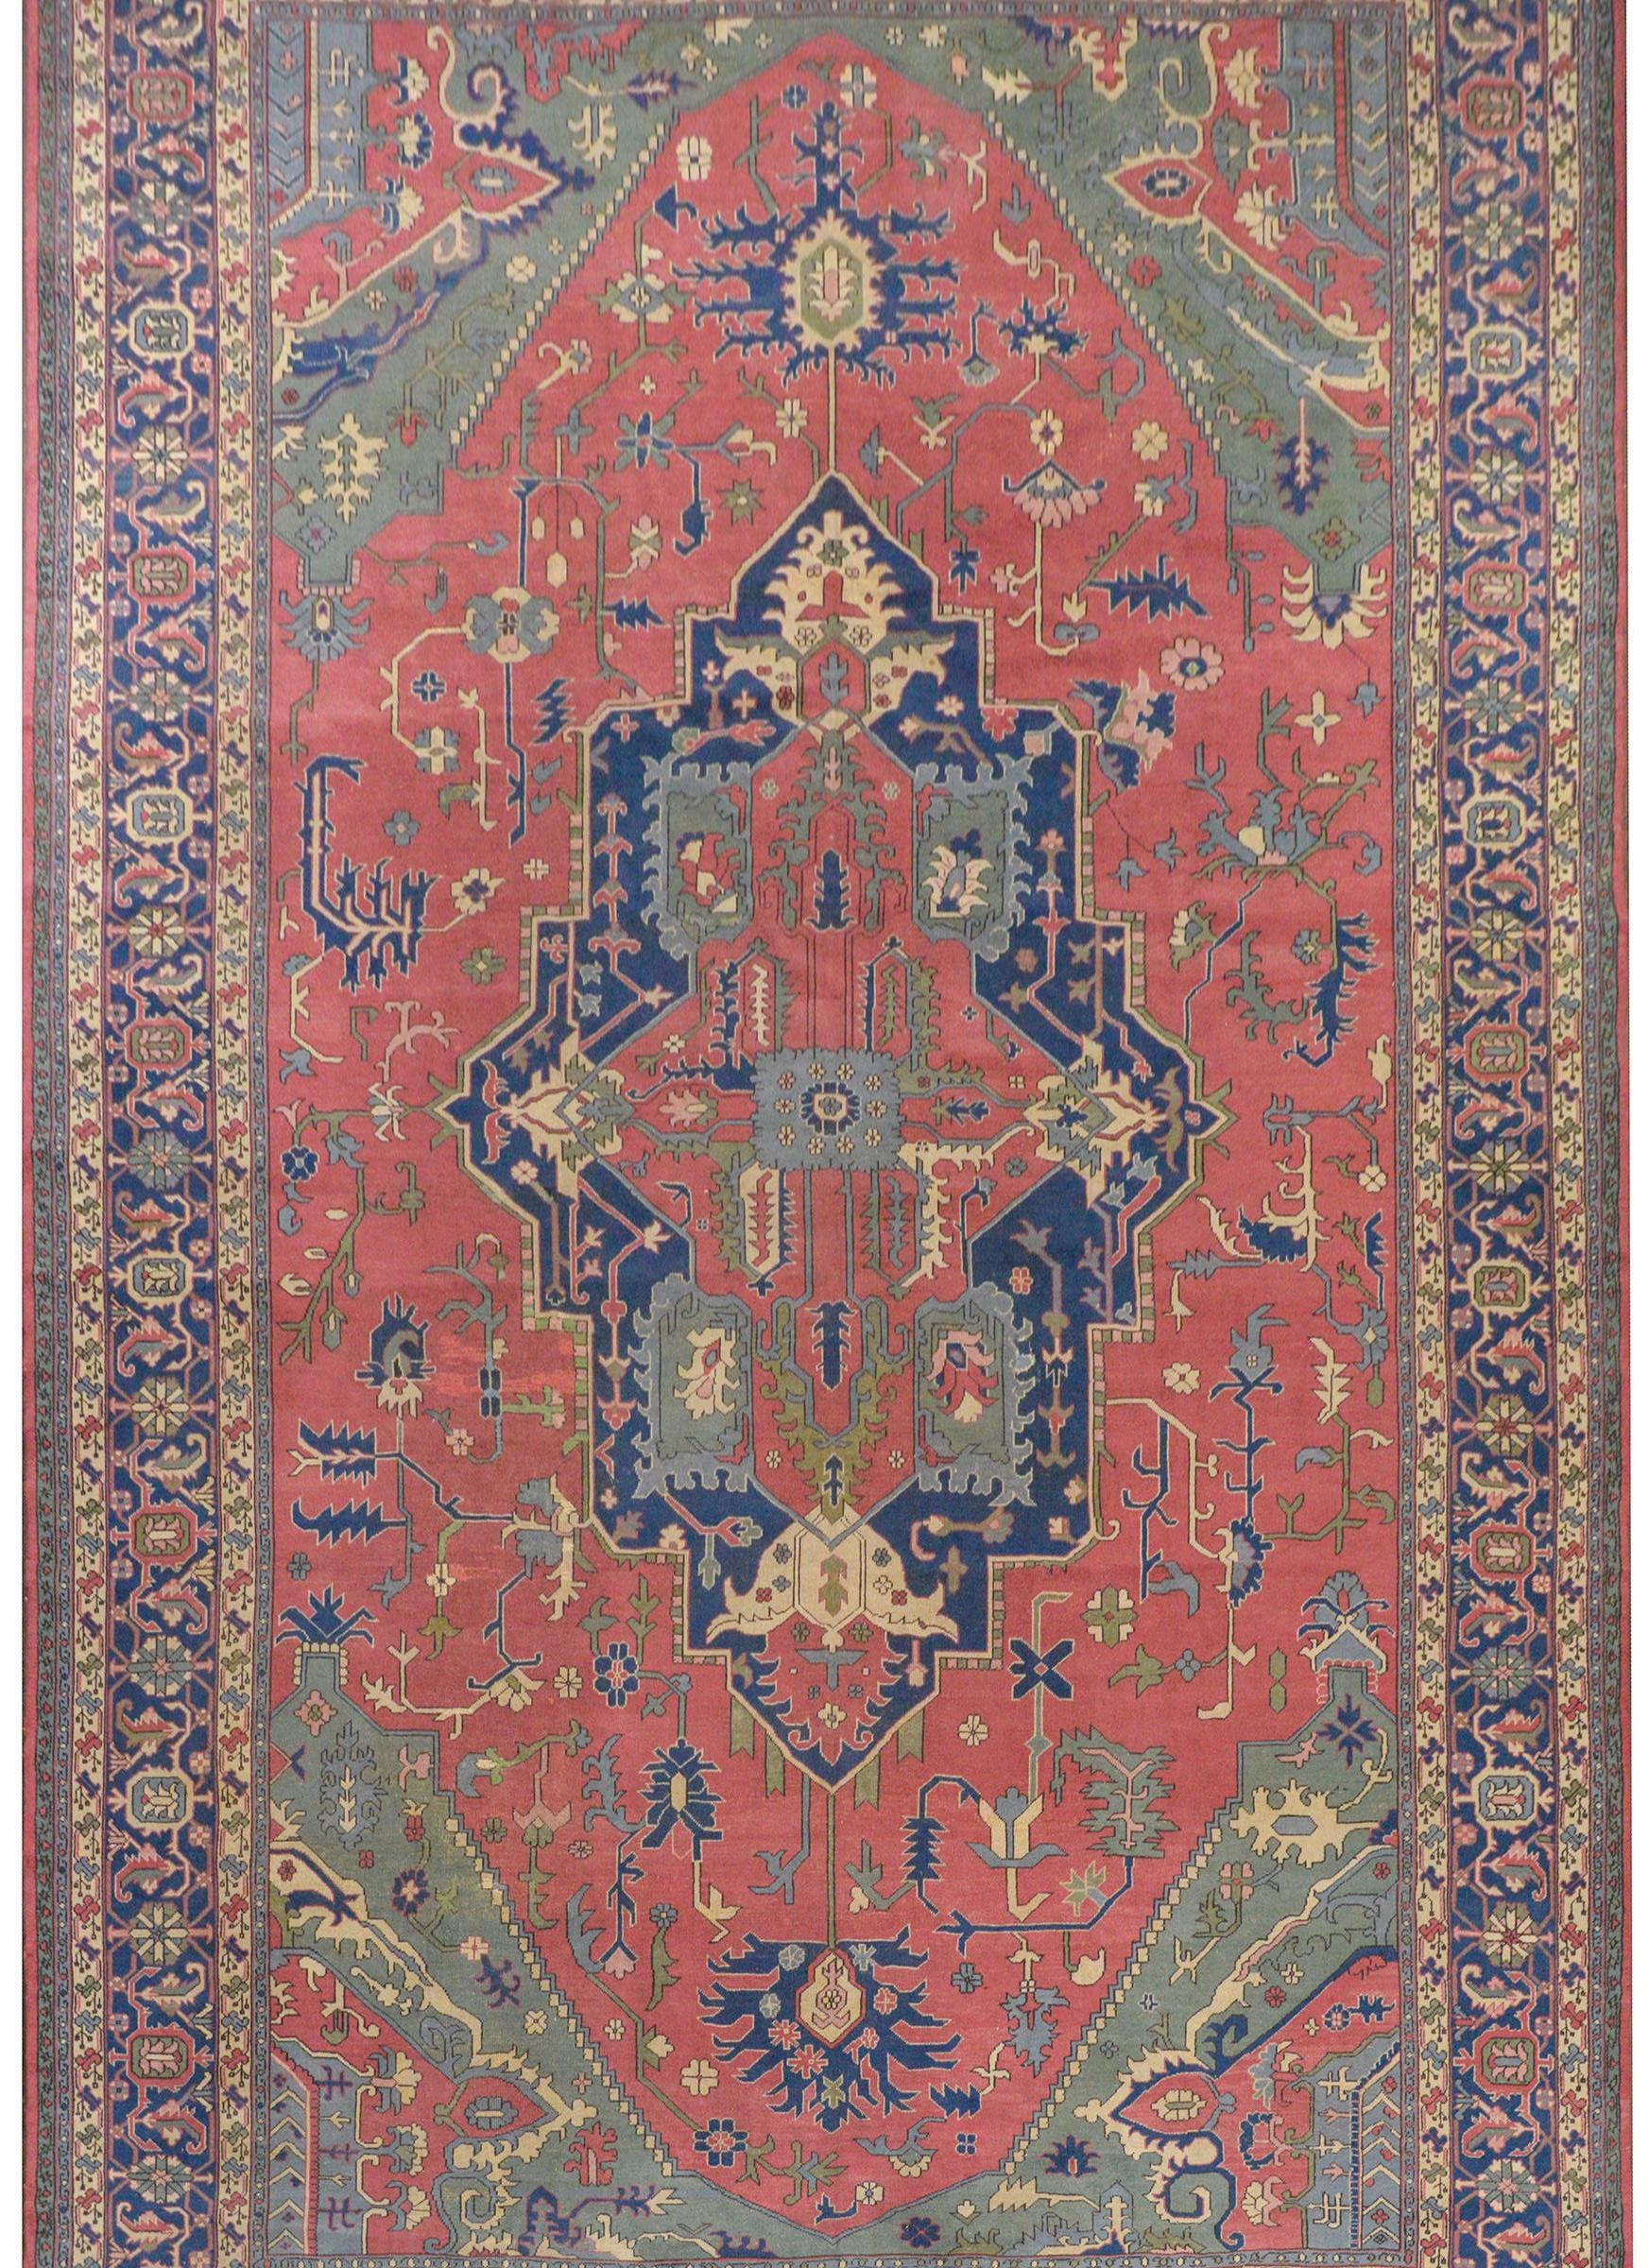 A wonderful massive early 20th century Turkish Sparta rug a traditional Serapi pattern containing a large central oblong floral medallion woven in muted crimson, light and dark indigo, green, and gold, all on a muted crimson field of myriad flowers